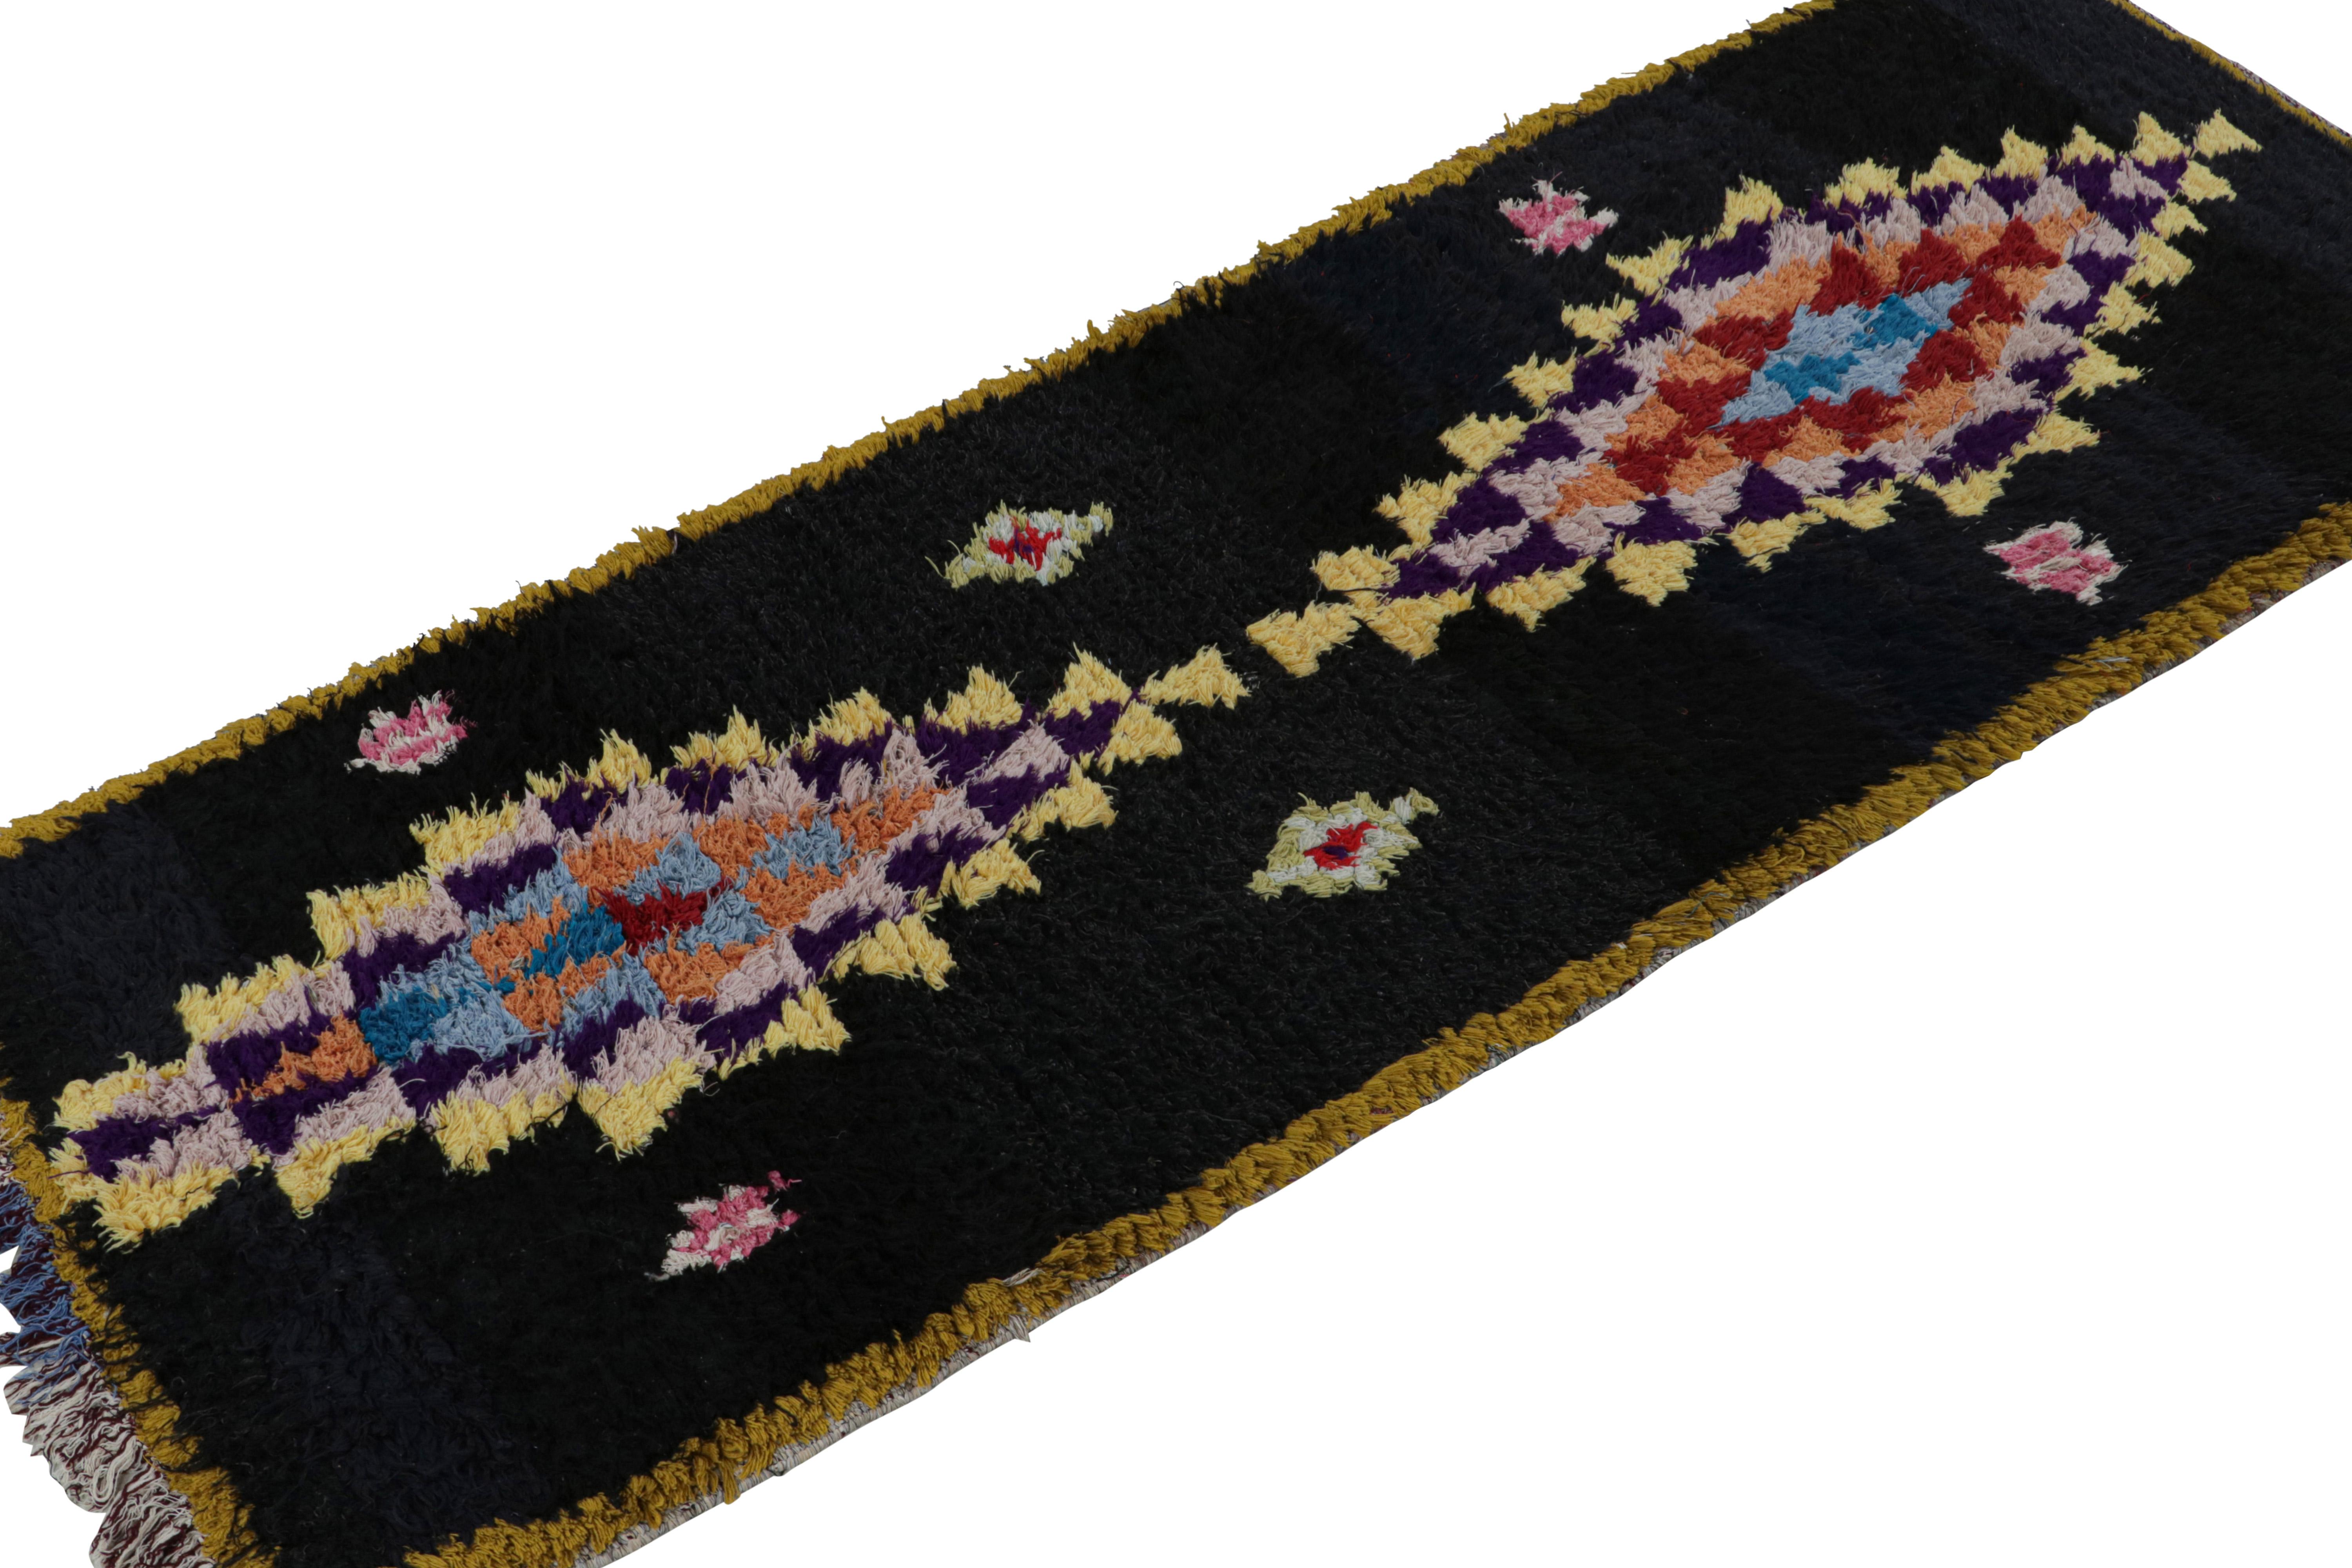 Hand-knotted in wool circa 1950-1960, this vintage 3x7 Moroccan runner is believed to hail from the Azilal tribe. 

On the Design: 

This runner is especially rare for being among the few Moroccan tribal rug provenance to favor black like this open